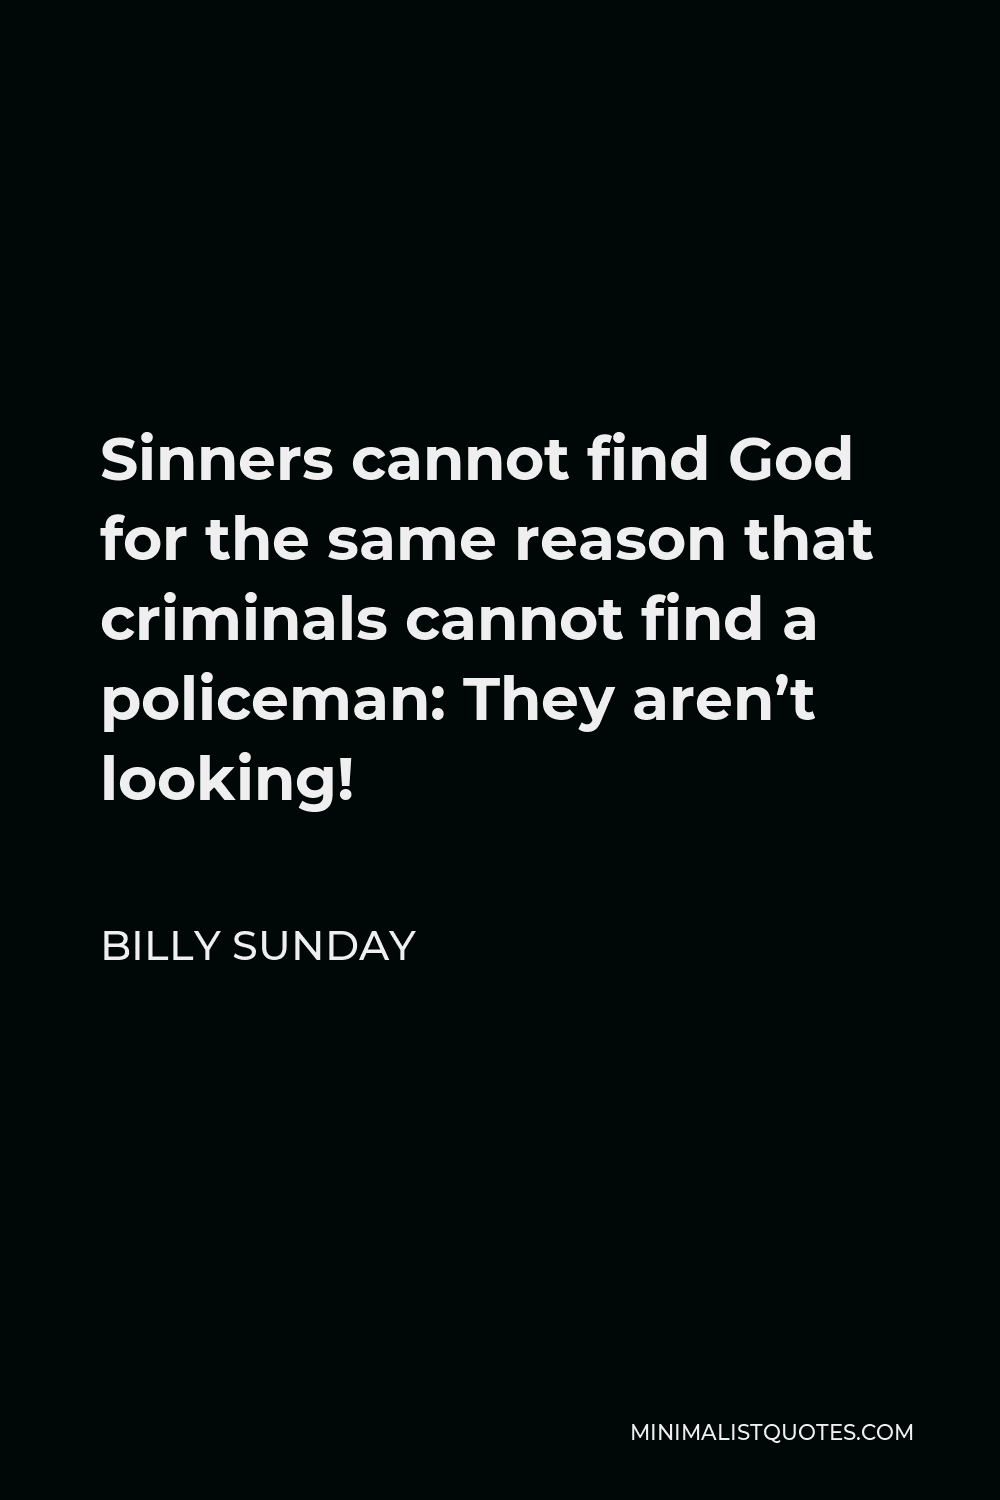 Billy Sunday Quote - Sinners cannot find God for the same reason that criminals cannot find a policeman: They aren’t looking!